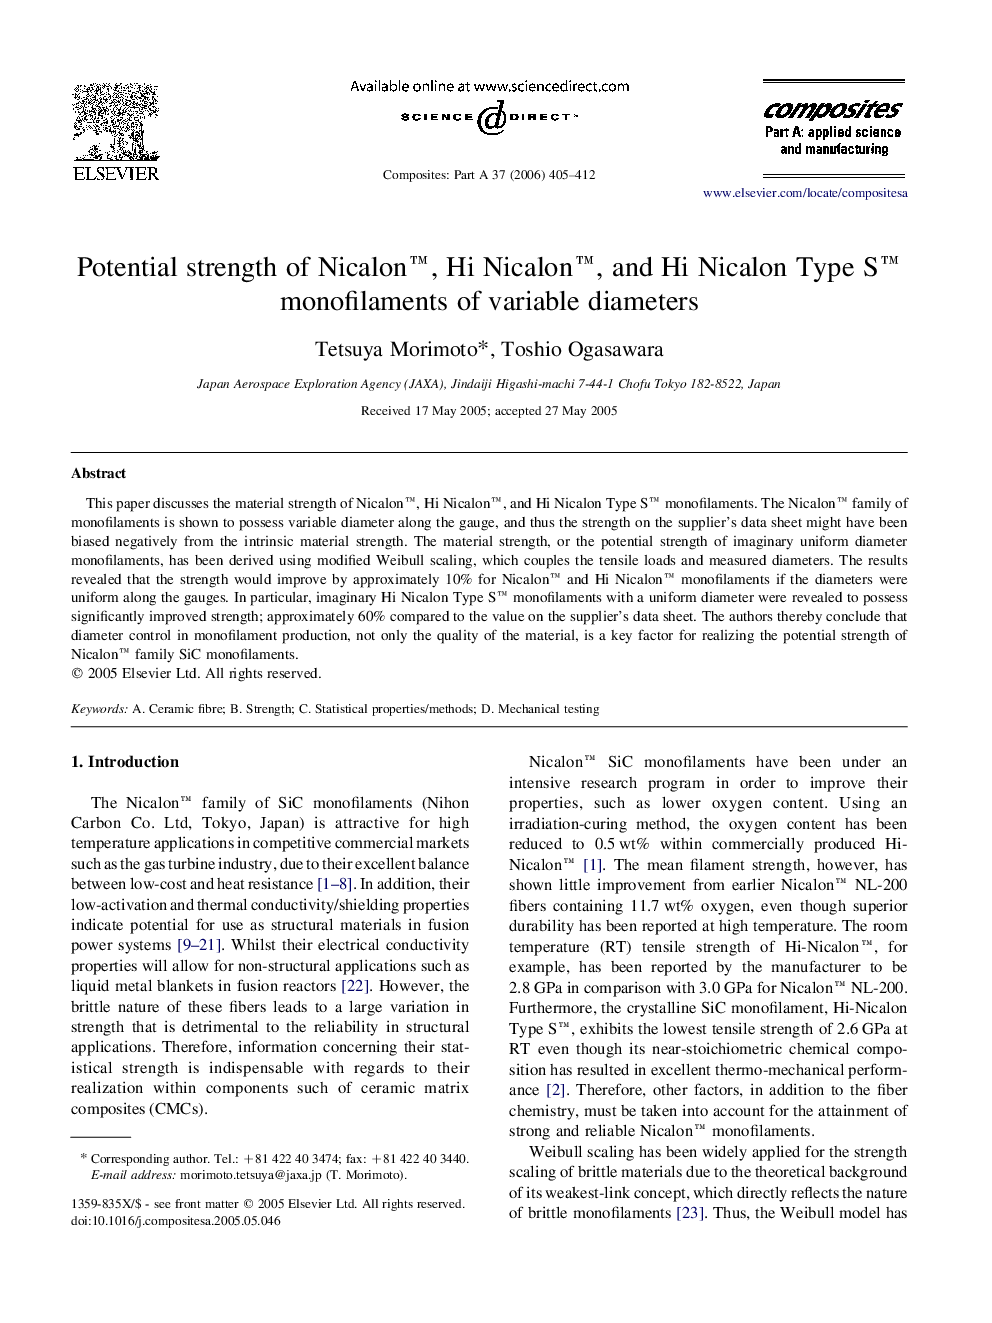 Potential strength of Nicalon™, Hi Nicalon™, and Hi Nicalon Type S™ monofilaments of variable diameters